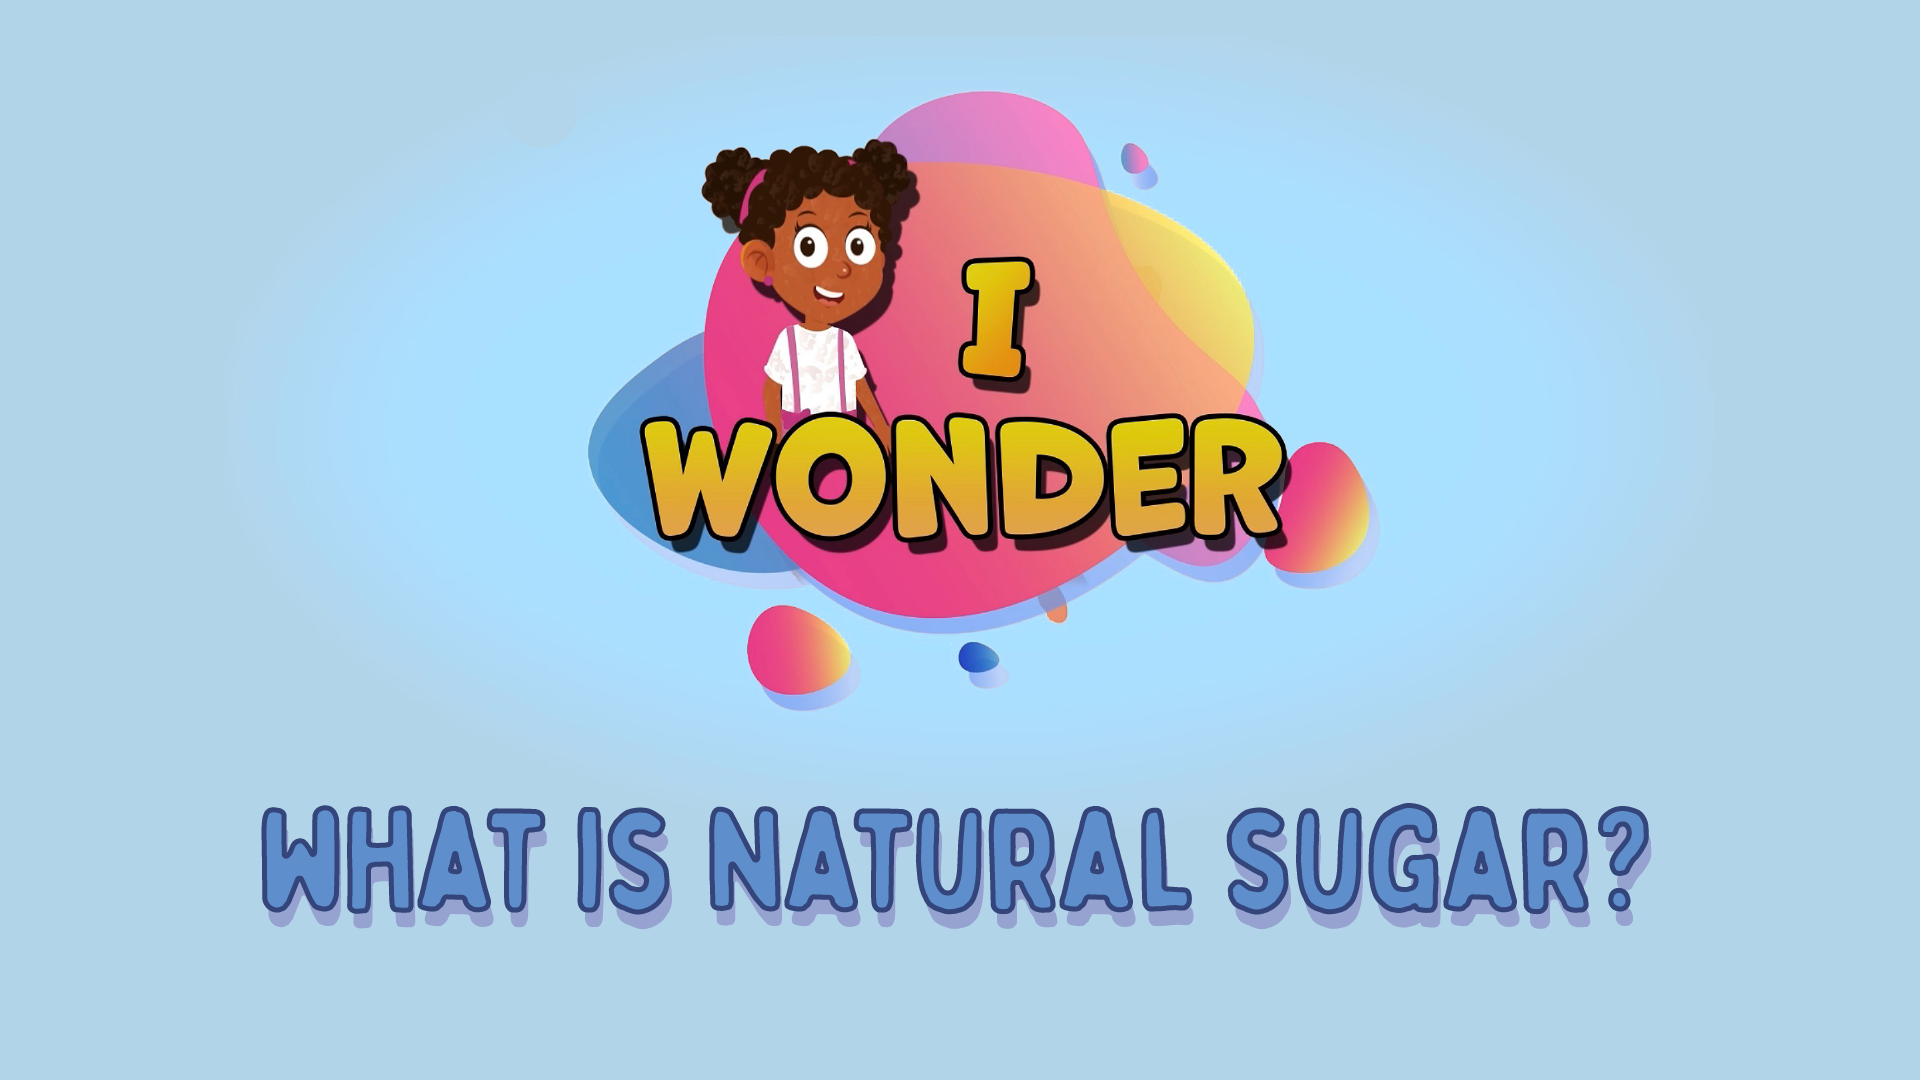 What Is Natural Sugar?